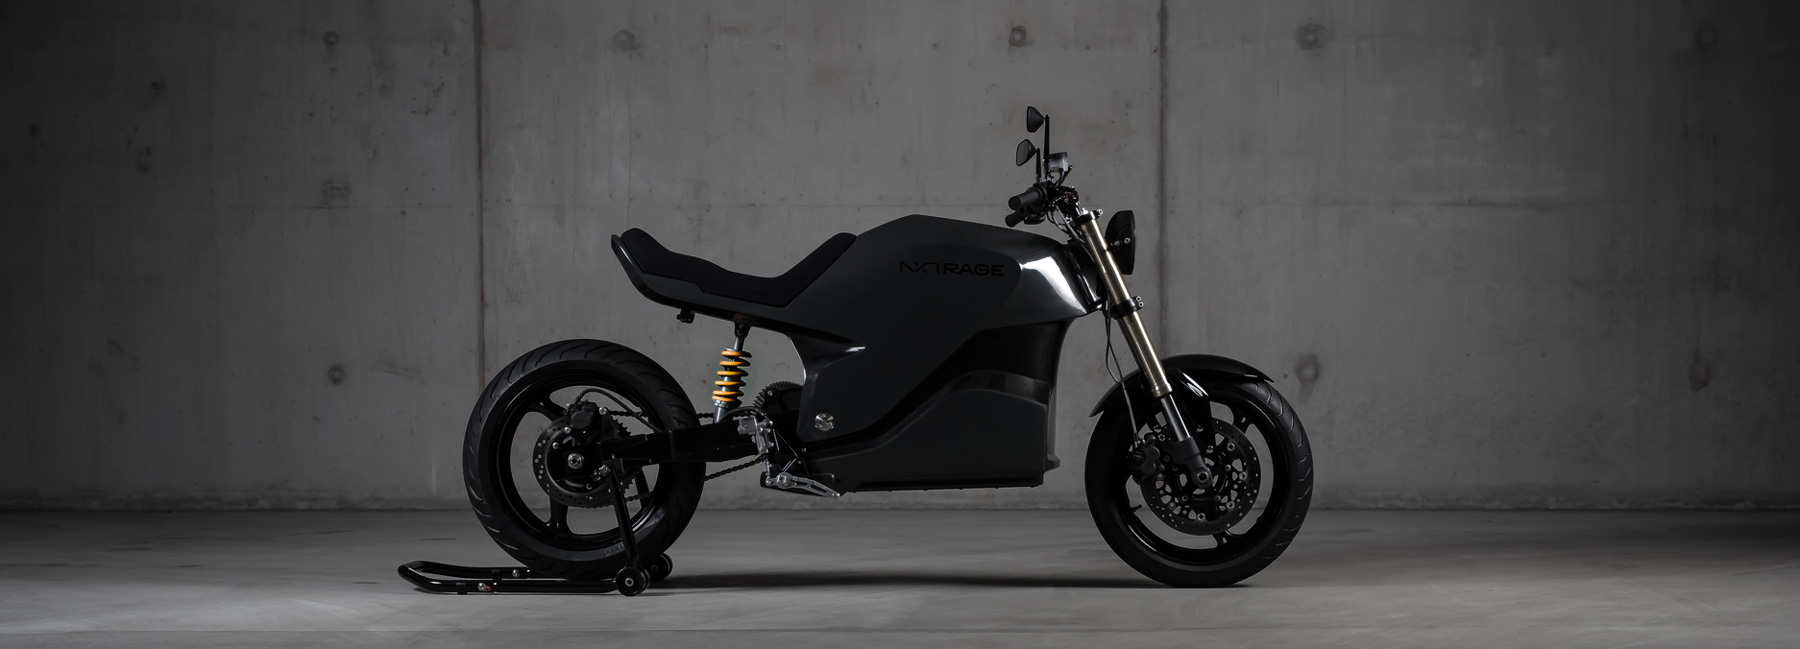 electric motorcycle and scooter design | designboom.com